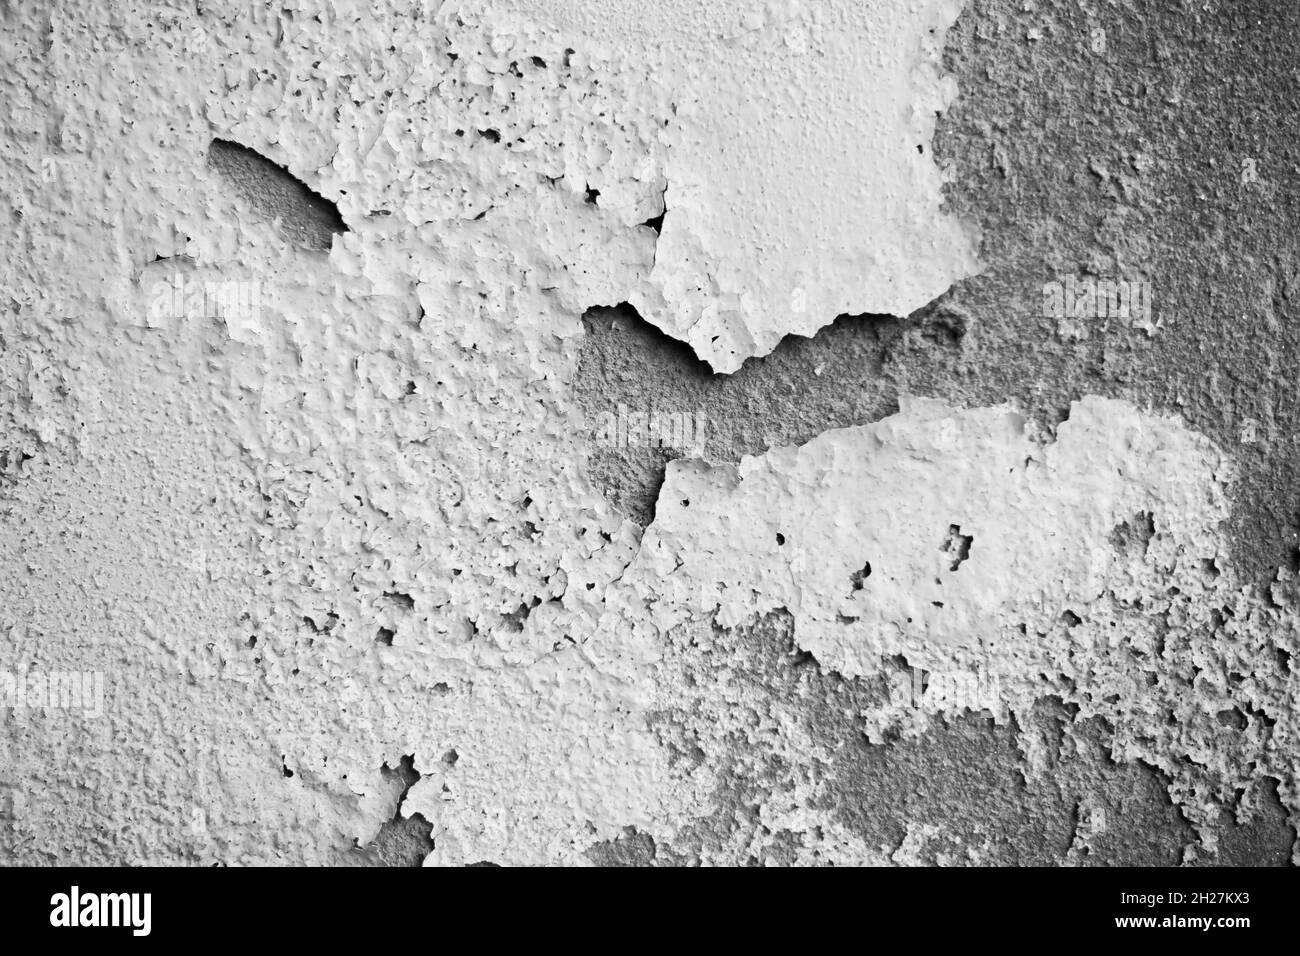 fugl Ugle omdrejningspunkt White damp wall showing paint cracking open and breaking or peeling off.  The fragile white lining of the walls. Abstract cracked and swollen  black-whi Stock Photo - Alamy